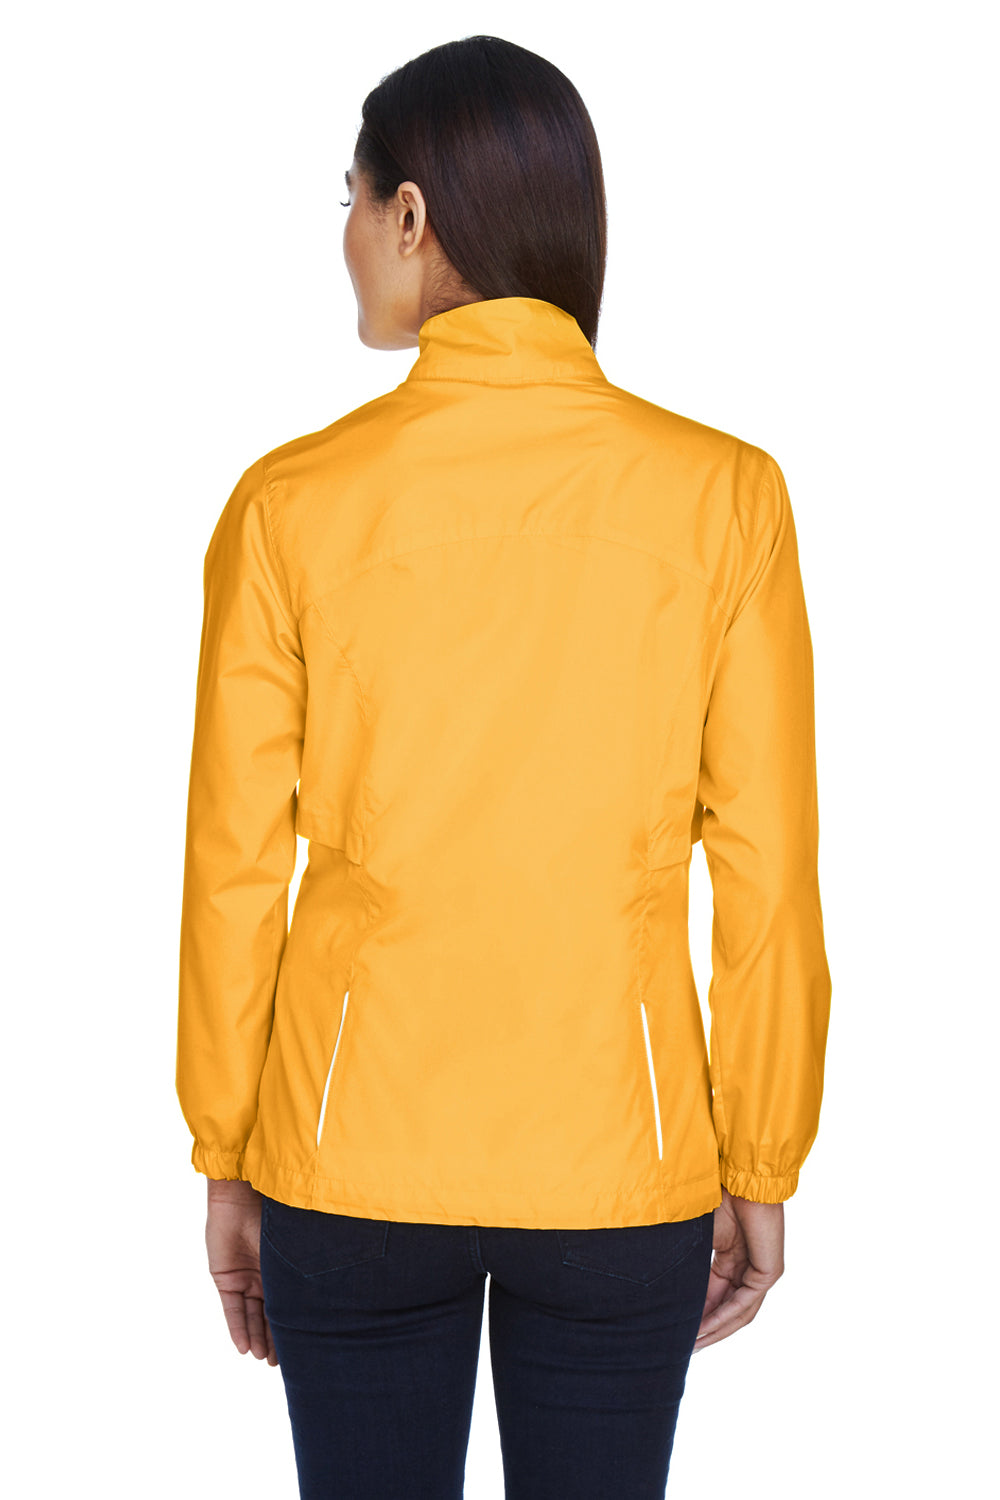 Core 365 78183 Womens Motivate Water Resistant Full Zip Jacket Gold Back